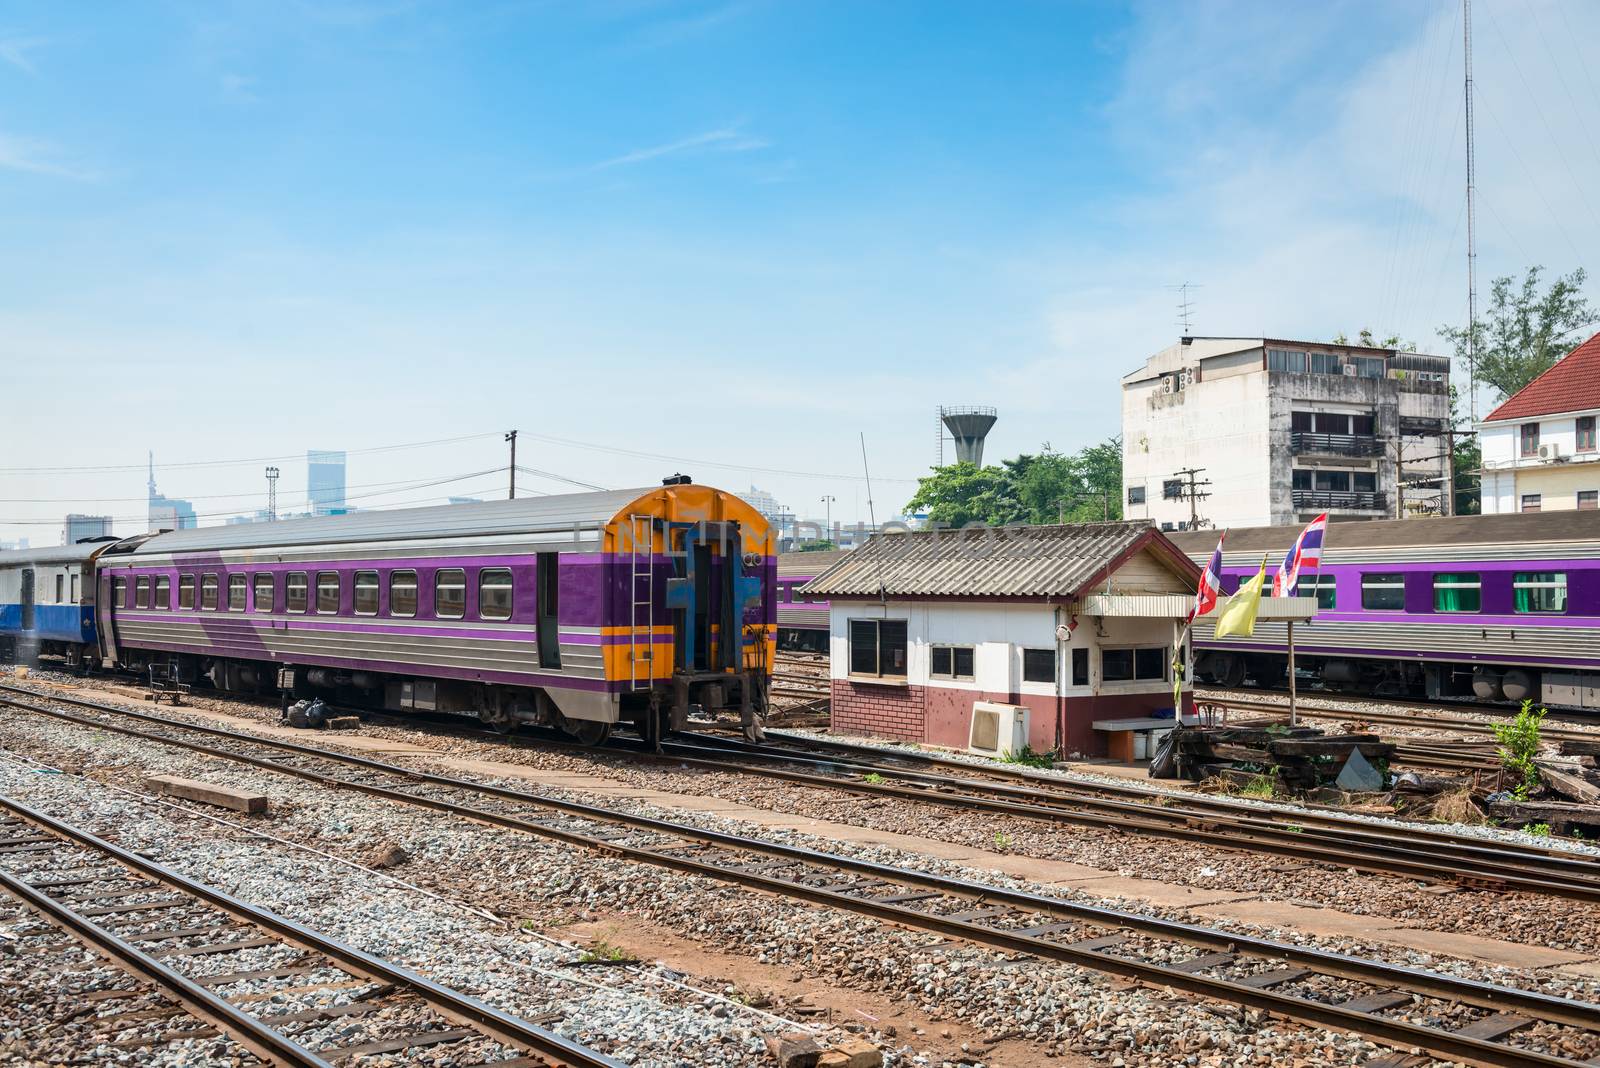 Trains stand at railway transport interchange with Thailand flags and big city buildings on background